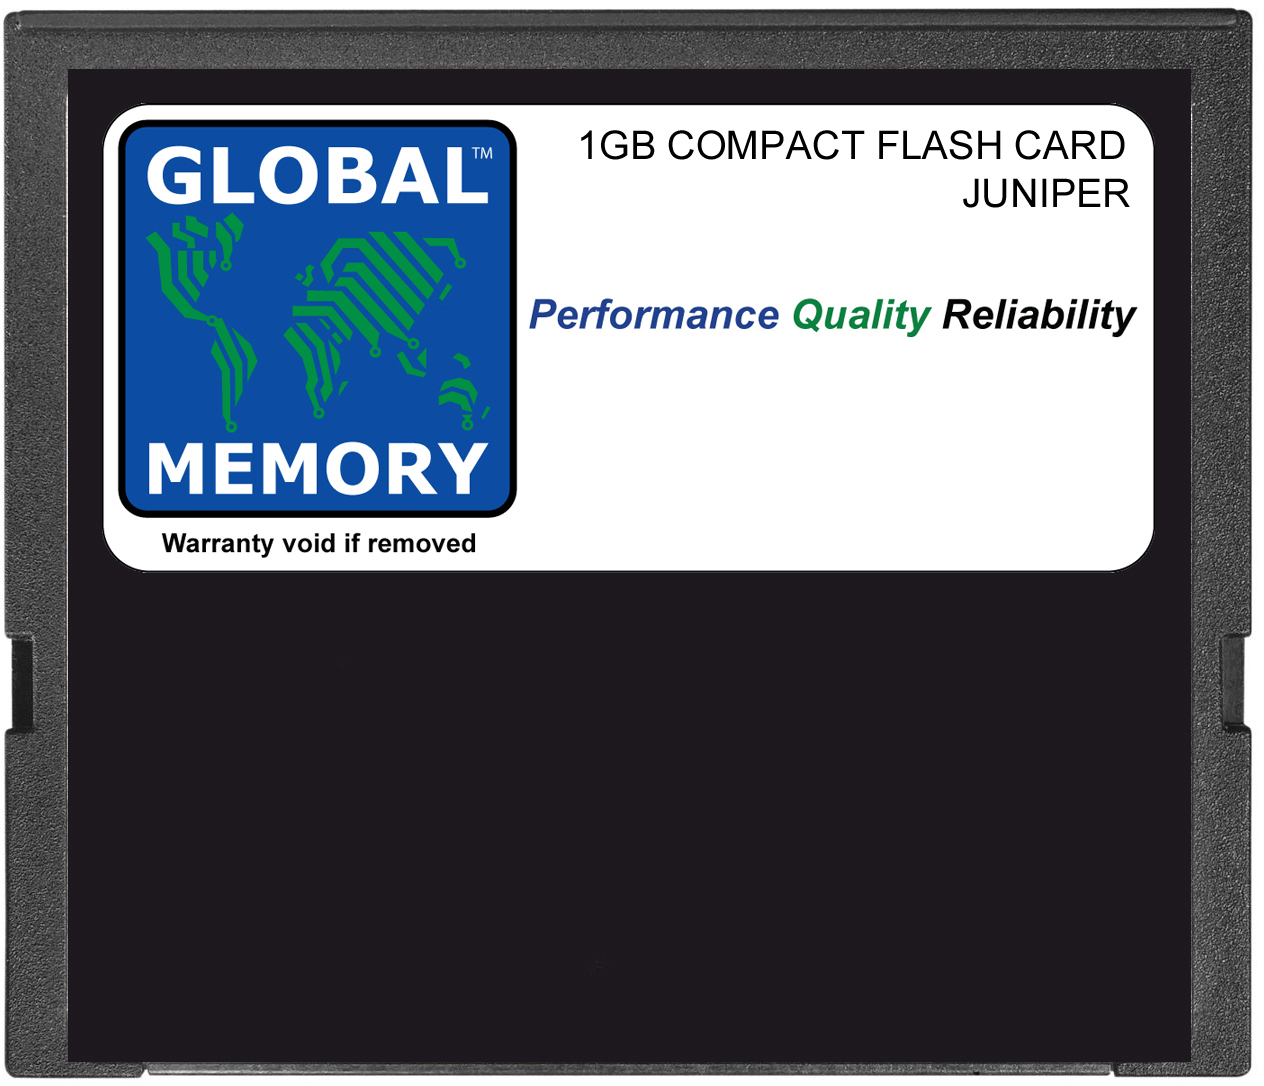 1GB COMPACT FLASH CARD MEMORY FOR JUNIPER J2300 / J4300 / J6300 SERIES ROUTERS & ROUTING ENGINES (JX-CF-1G-S , RE-CF-1G-S)